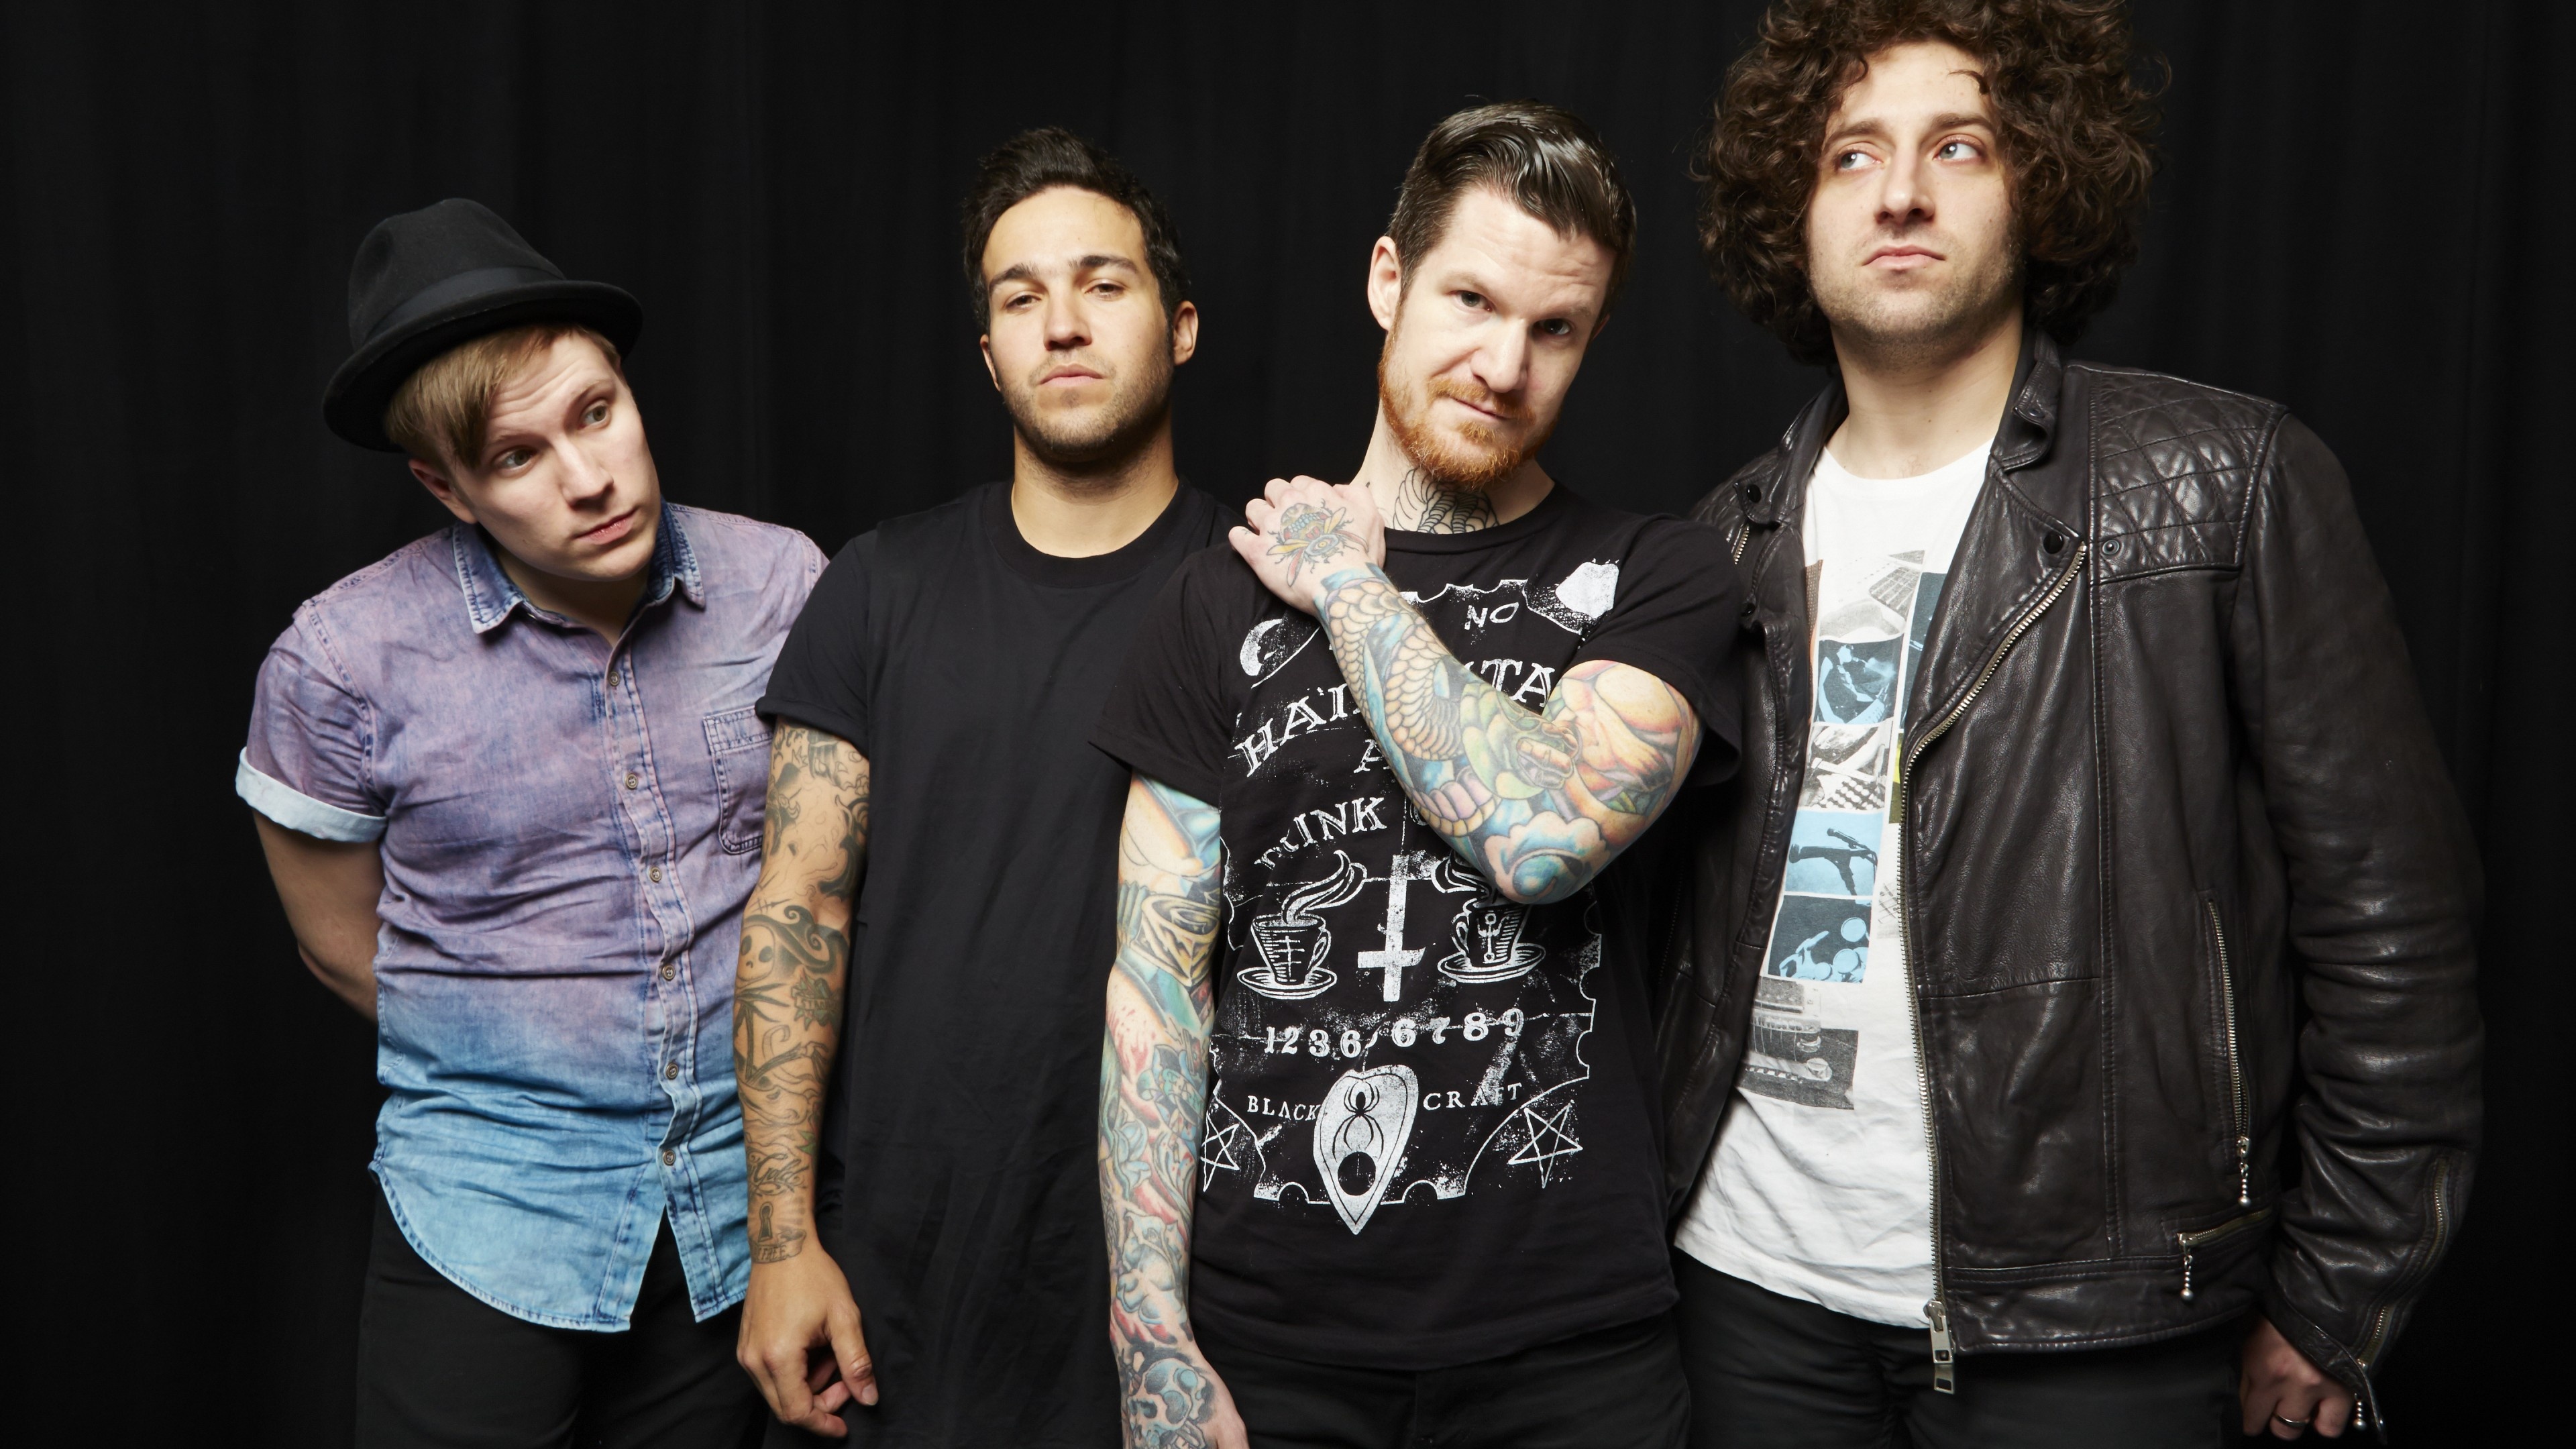 Fall Out Boy, Music artists, Band members, Celebrity wallpapers, 3840x2160 4K Desktop